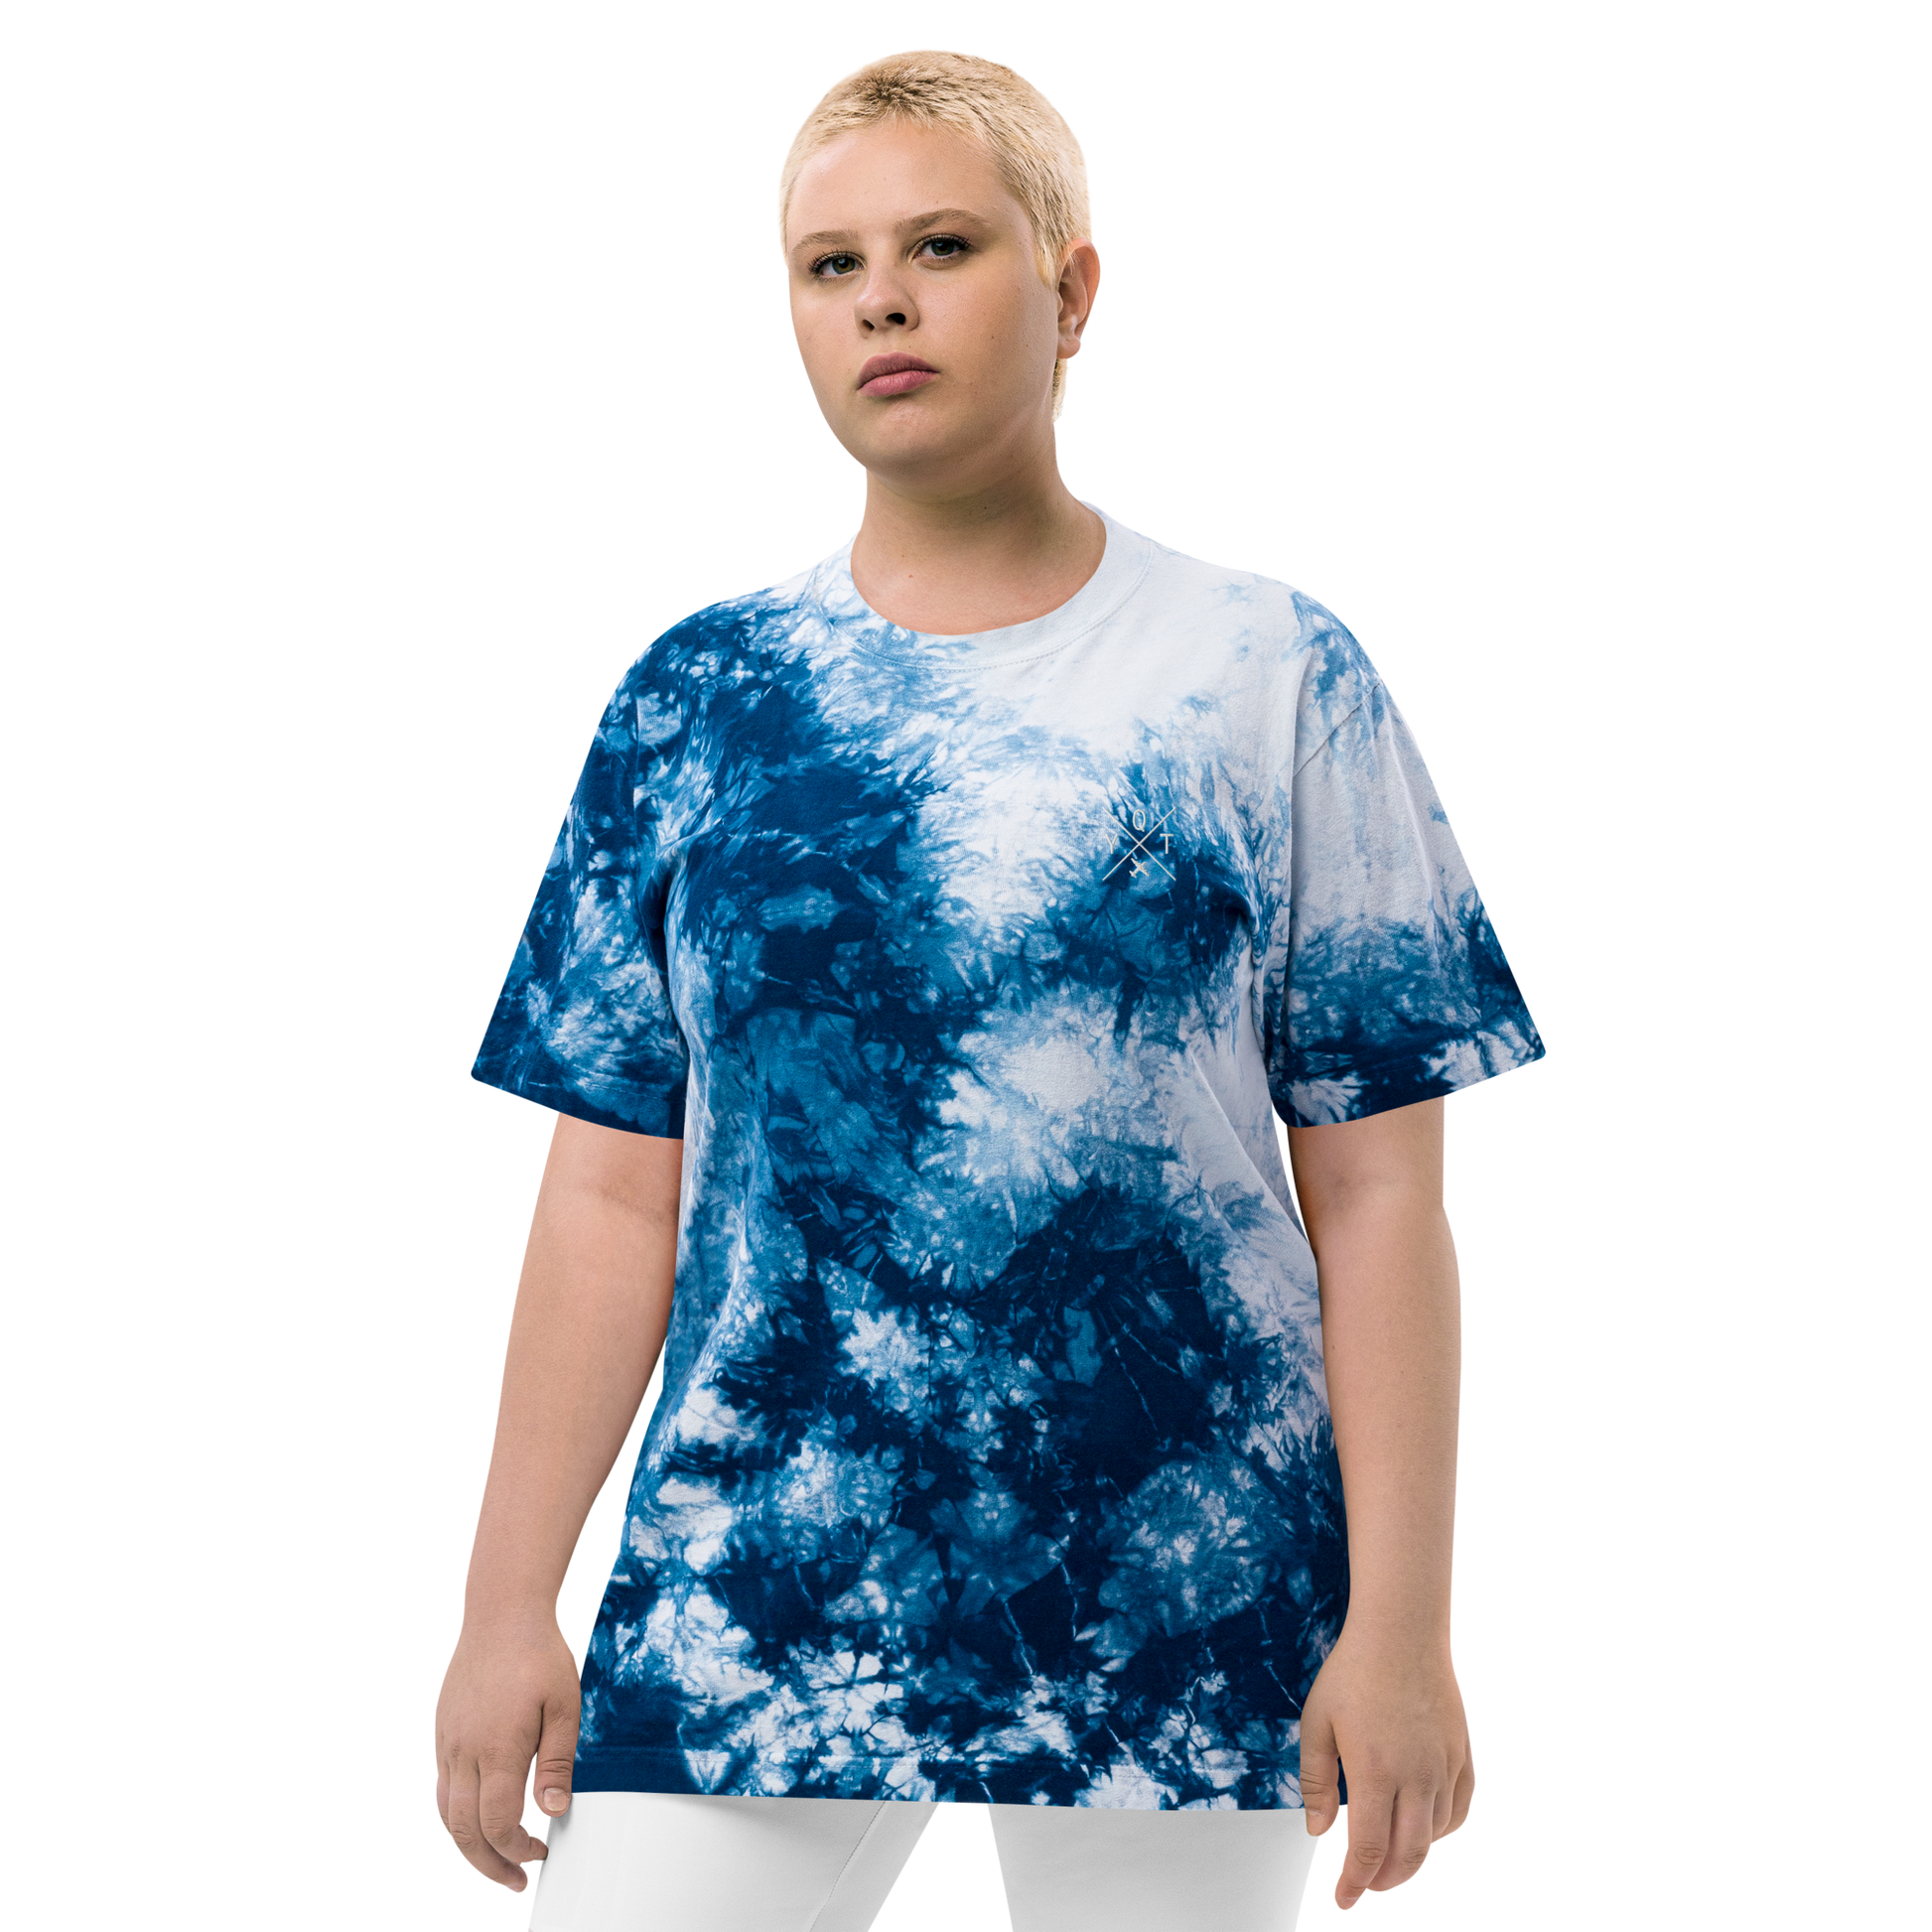 YHM Designs - YQT Thunder Bay Oversized Tie-Dye T-Shirt - Crossed-X Design with Airport Code and Vintage Propliner - White Embroidery - Image 08